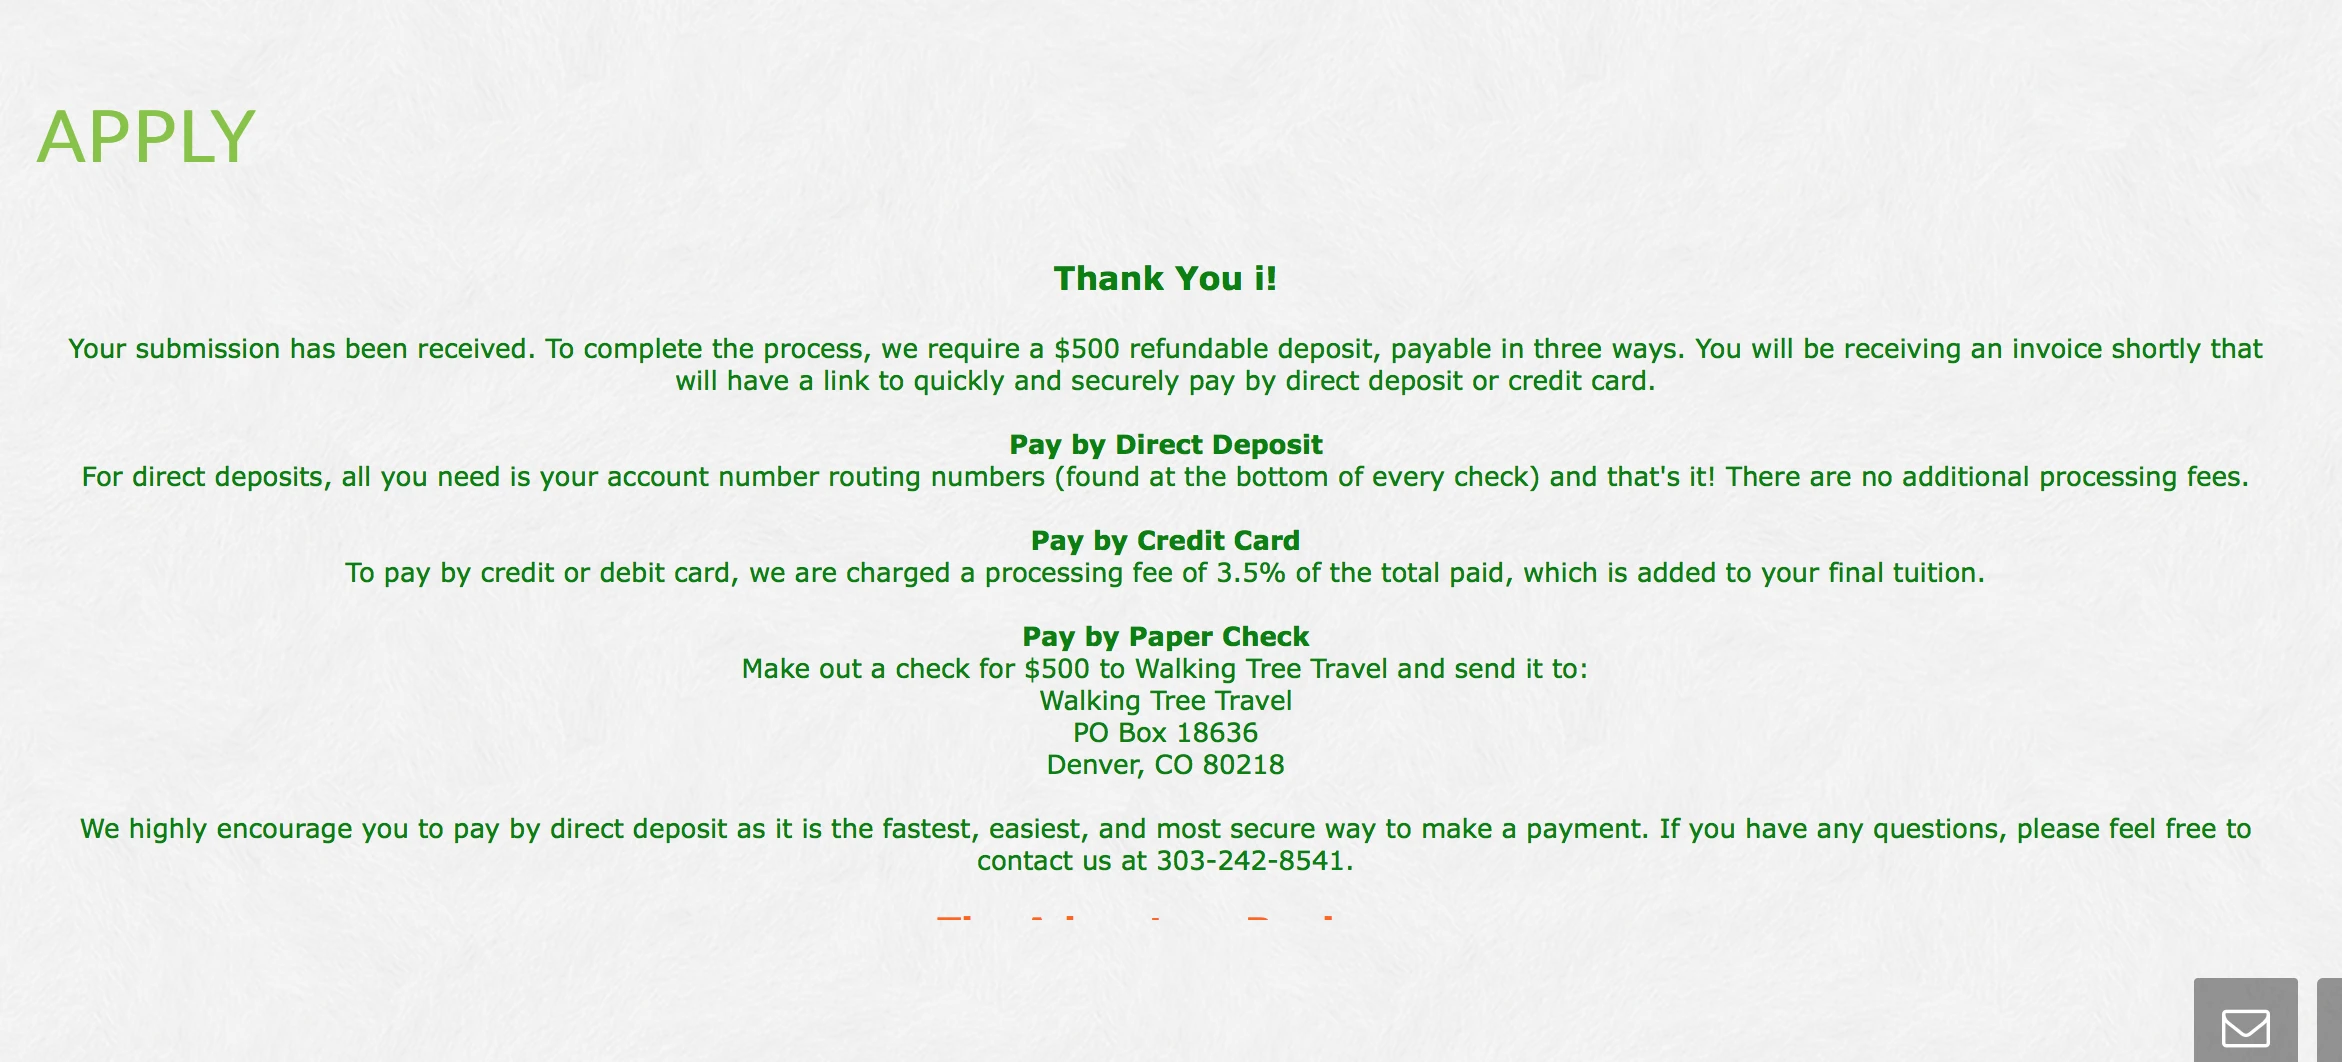 Custom Form Thank You Page Cutted Off Image 1 Screenshot 20